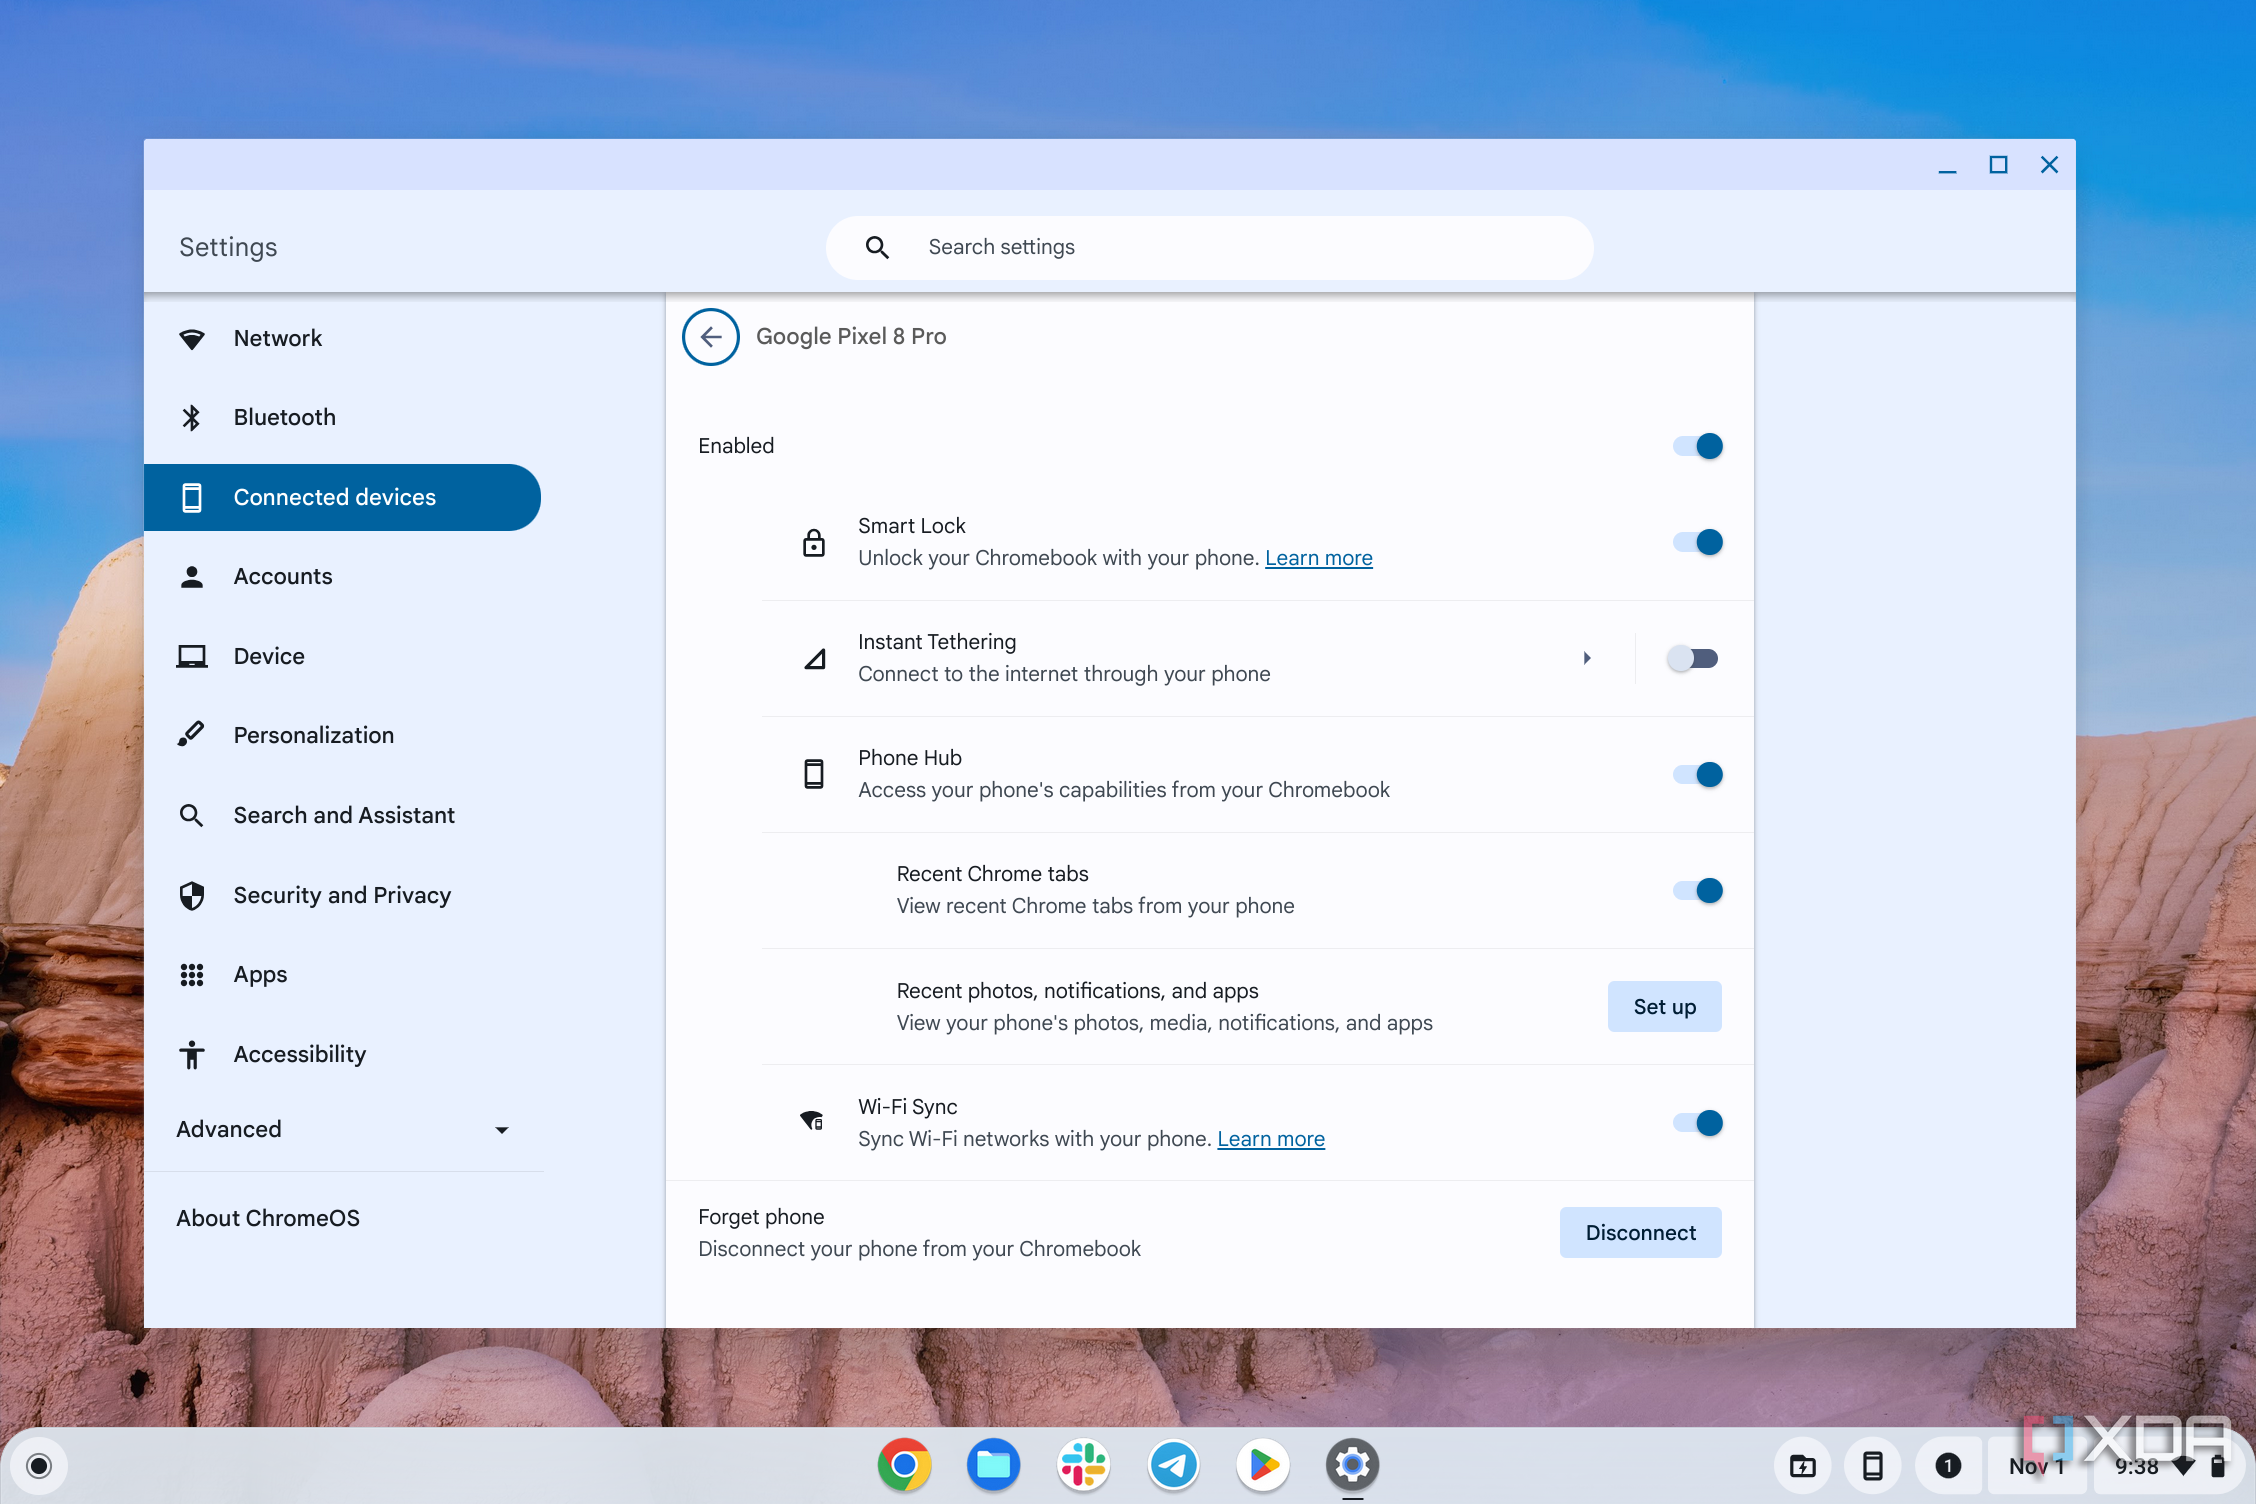 Android phone features on ChromeOS